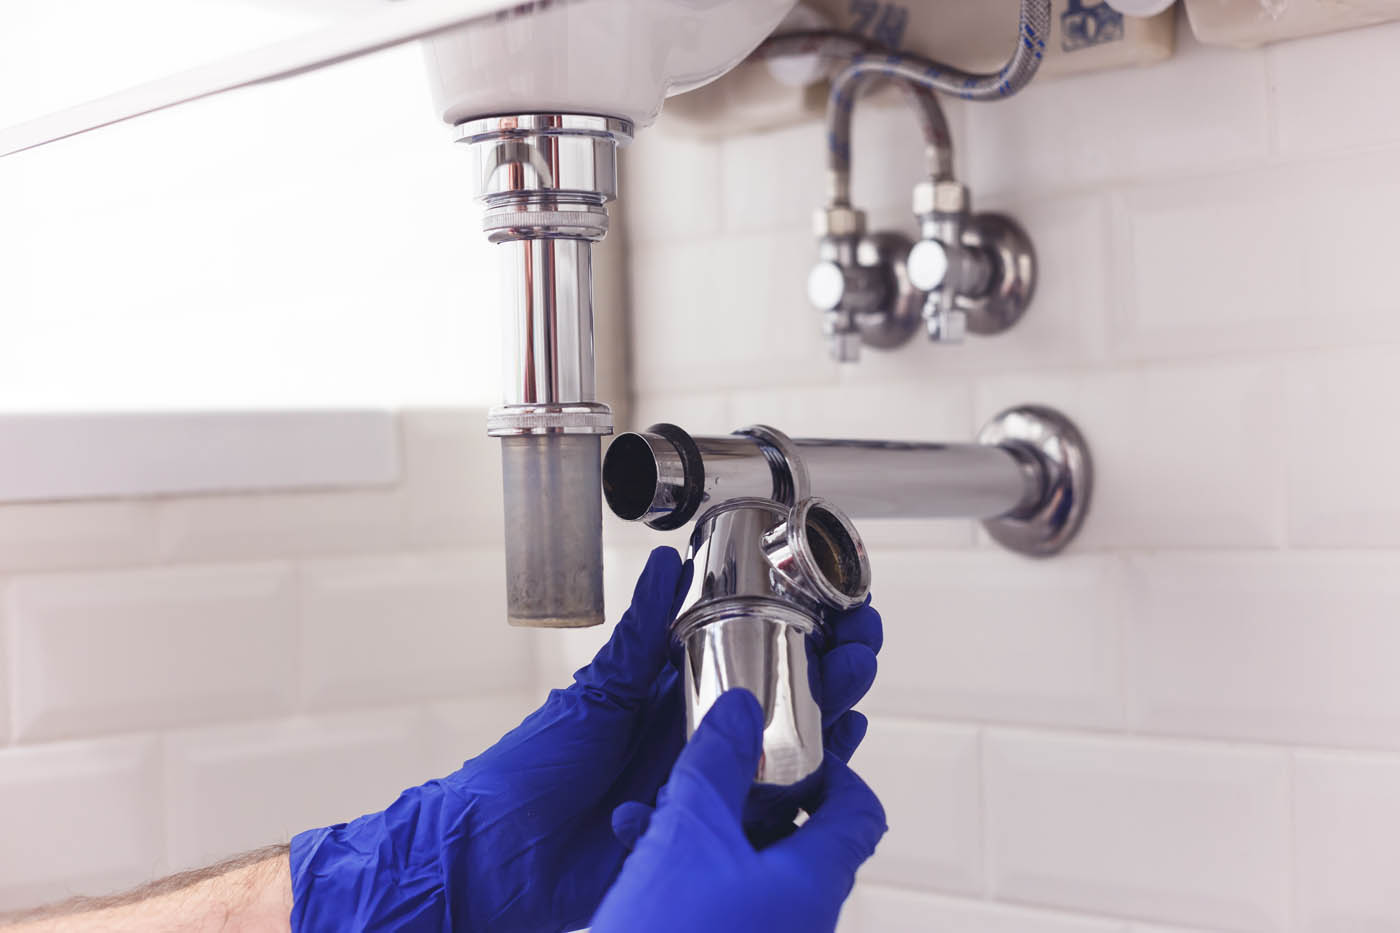 A plumber from Zest repair's a pipe - learn how you can prepare your plumbing for the summer with our tips!